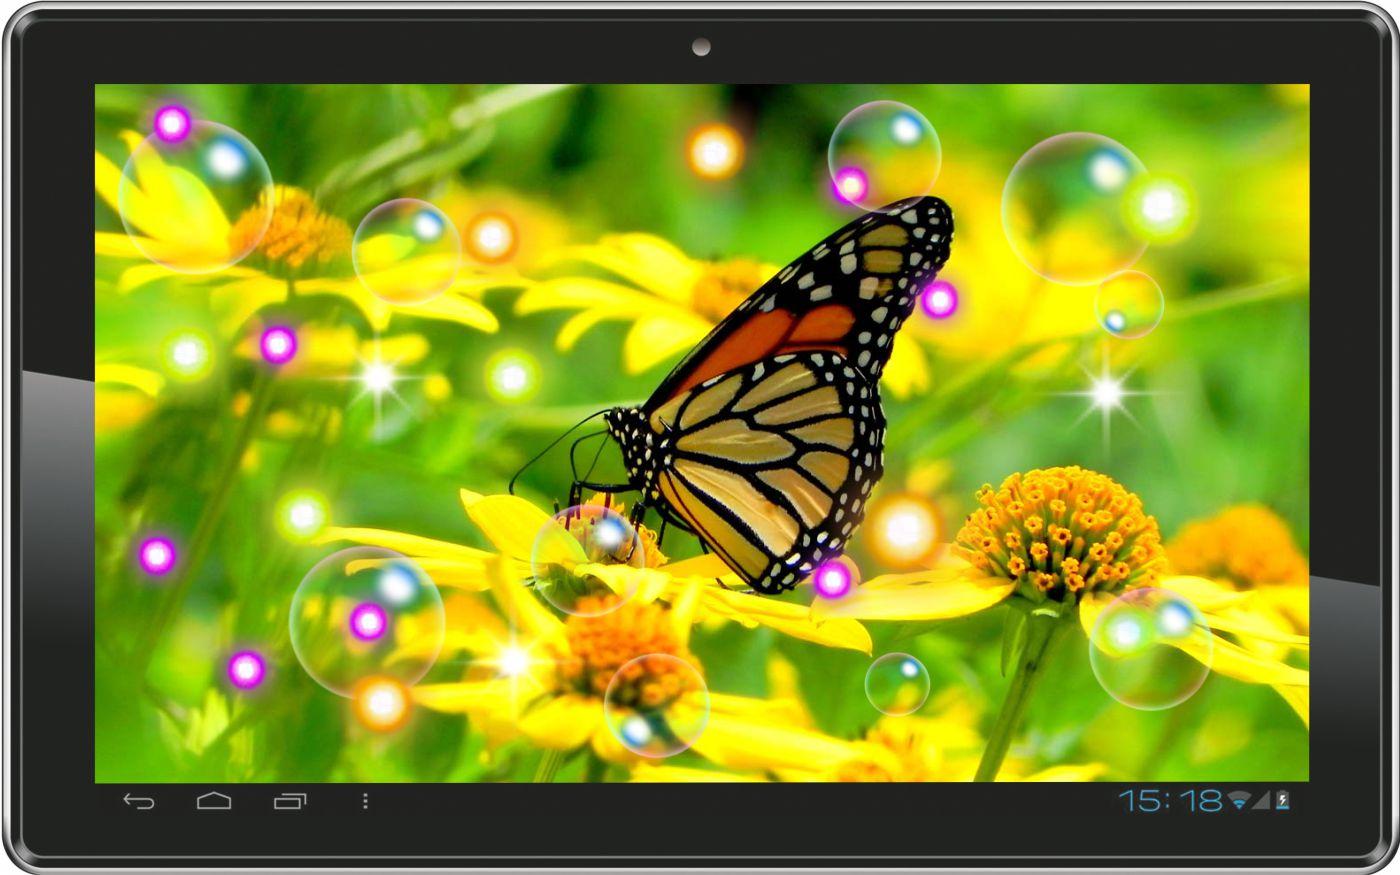 Butterfly Cool Live Wallpaper Android Apps On Google Play